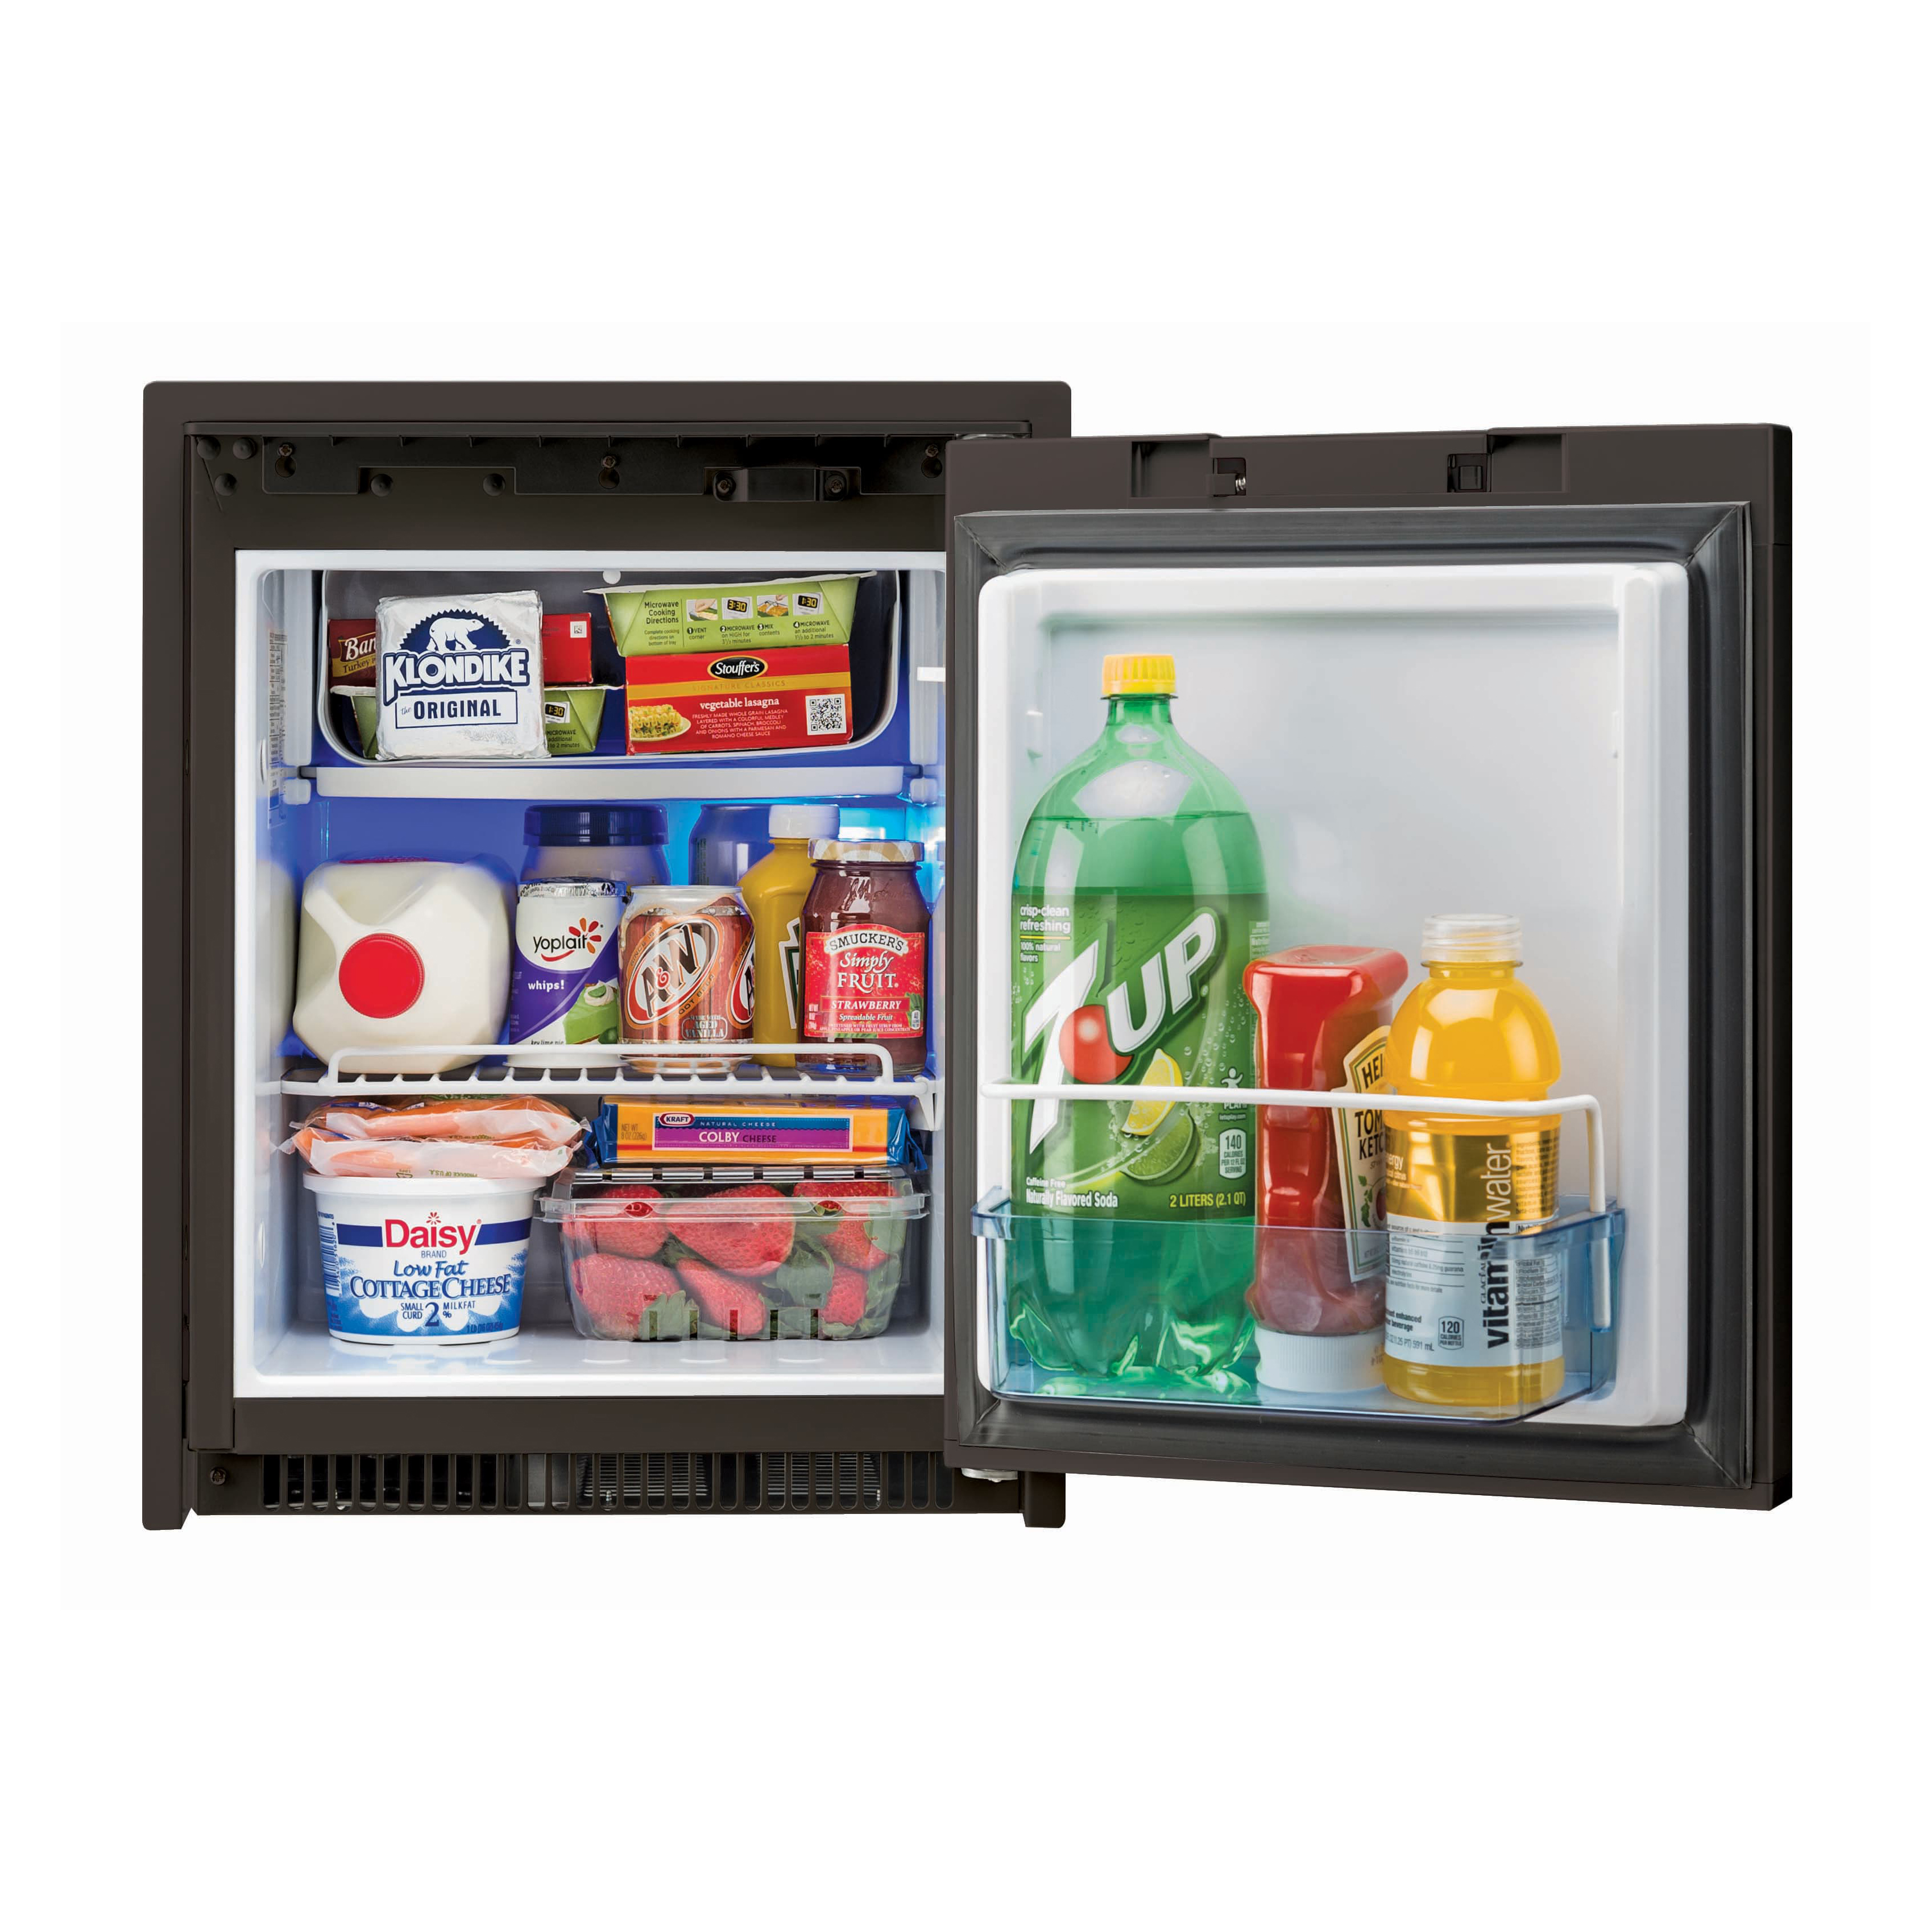 Norcold NR740SS Refrigerator (1.7 cubic foot) duel electric, AC/DC